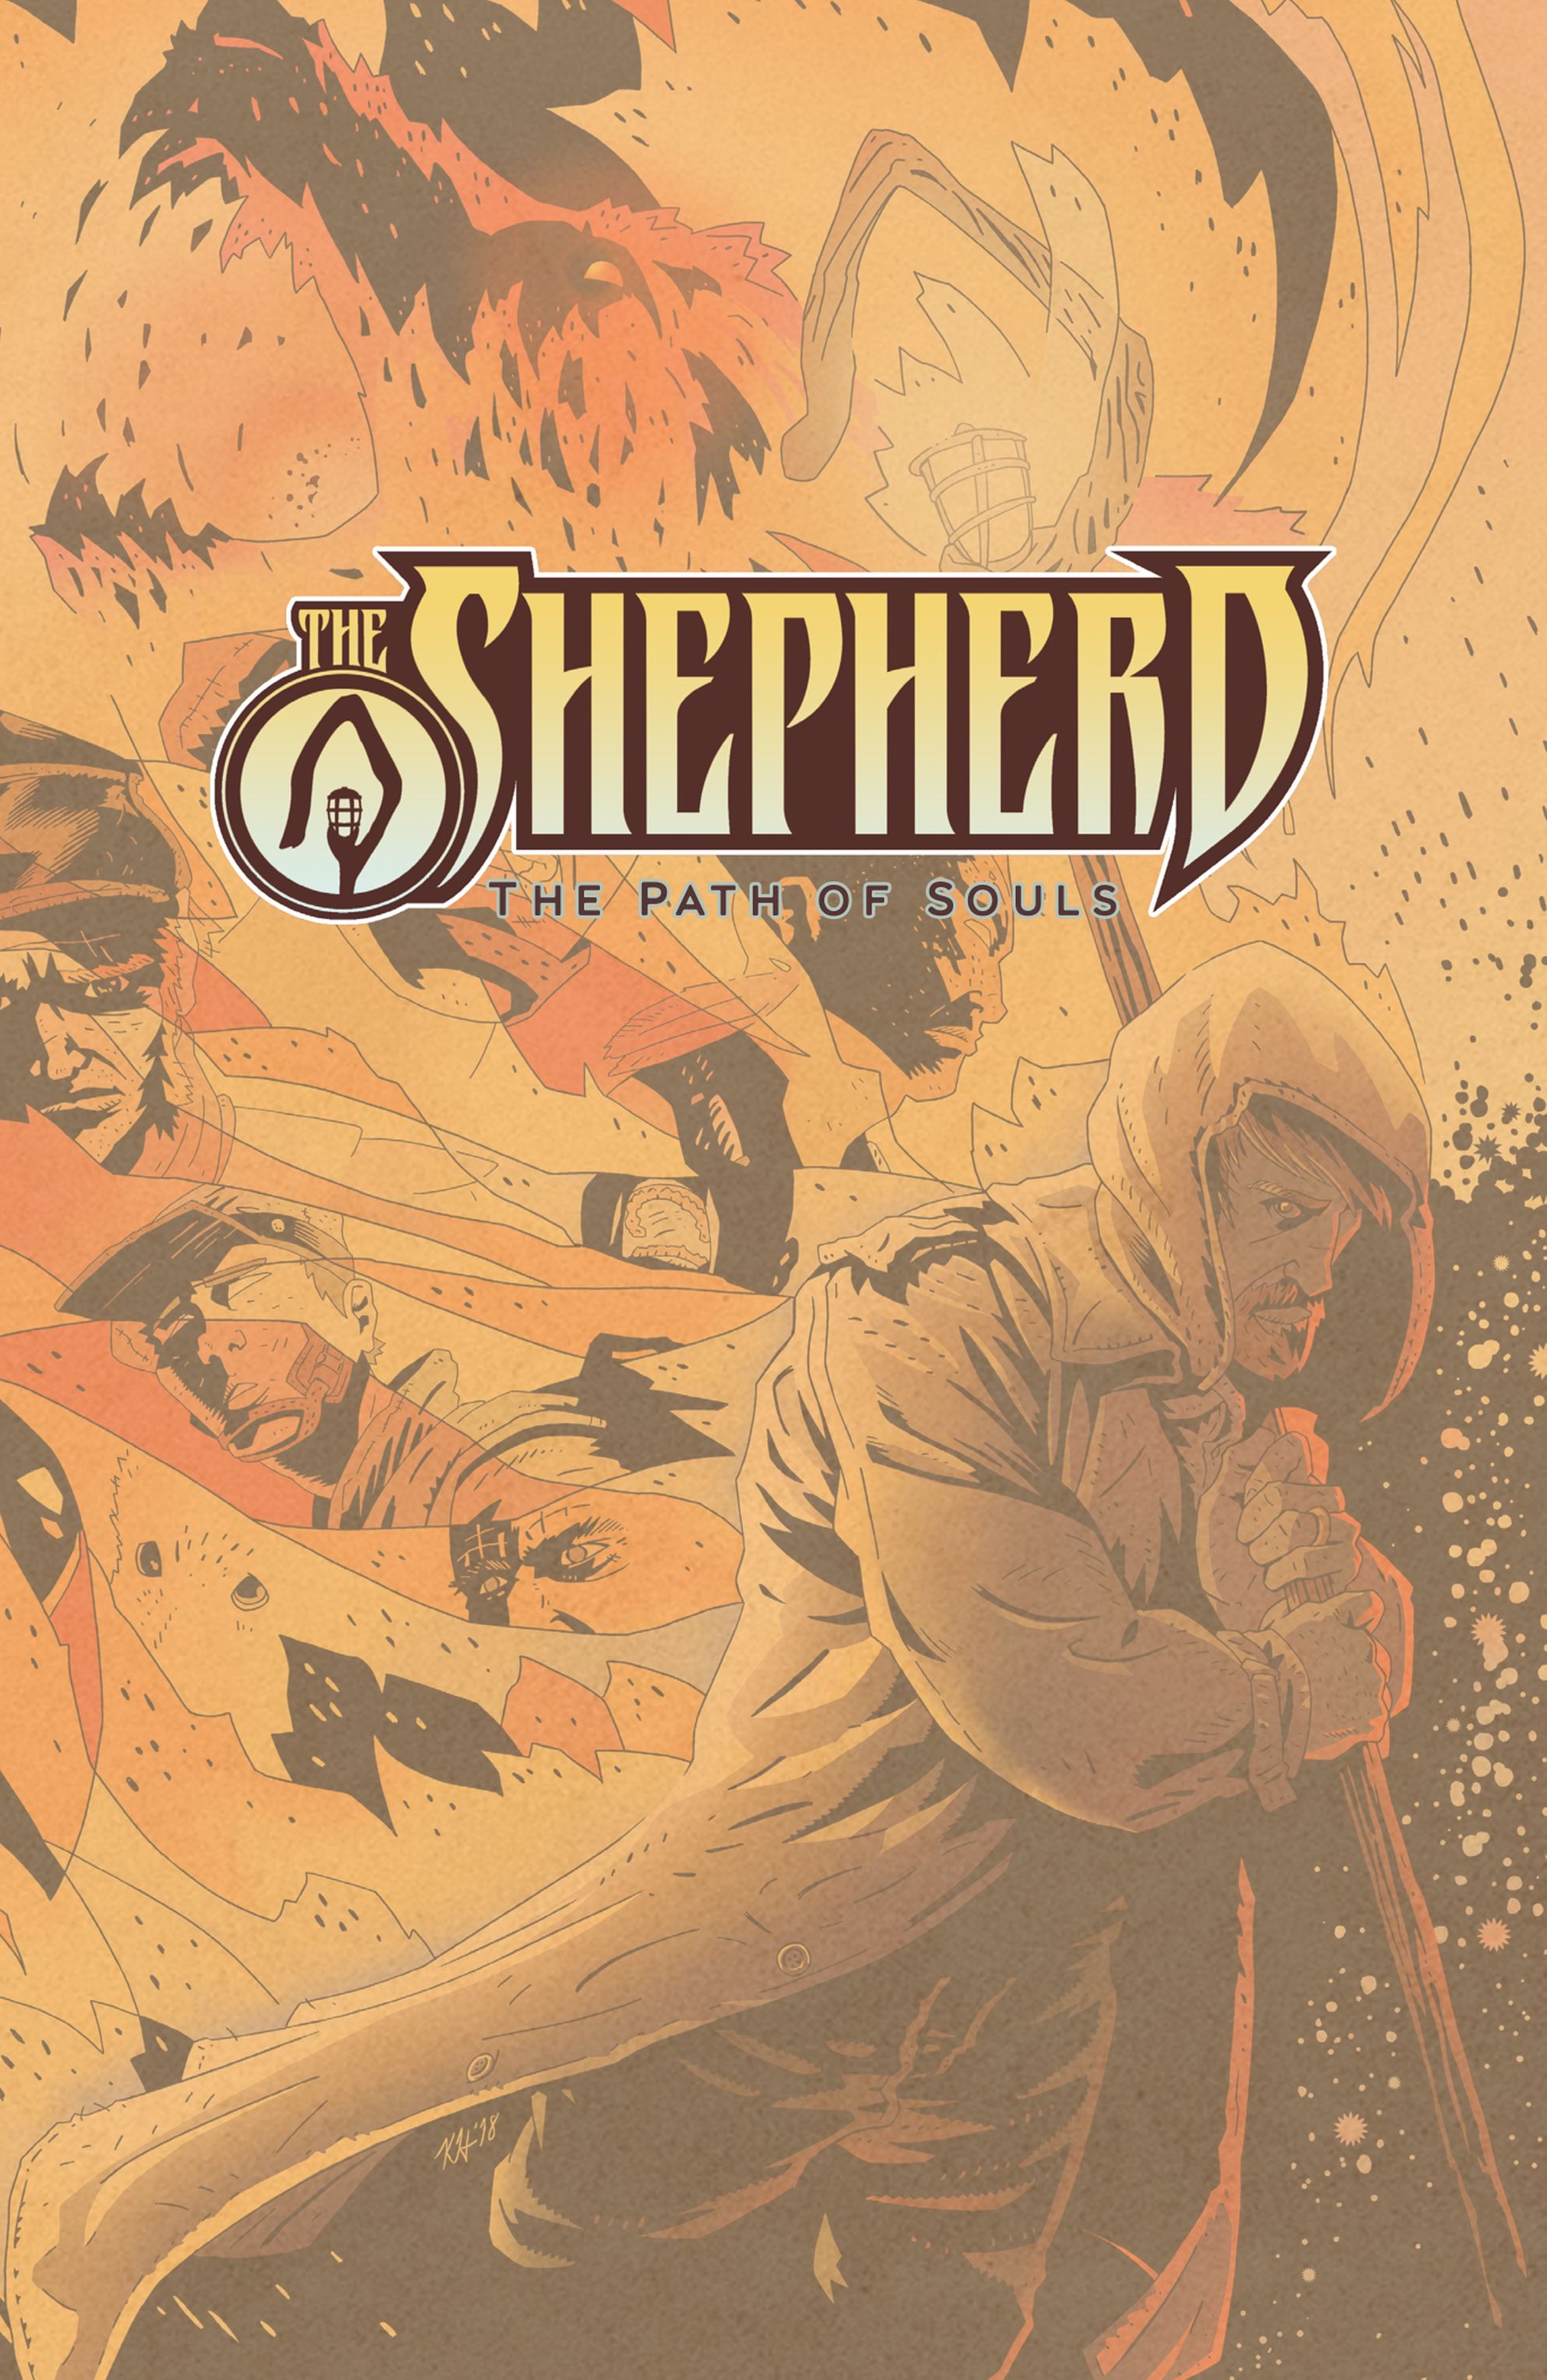 Read online The Shepherd: The Path of Souls comic -  Issue # TPB (Part 1) - 3